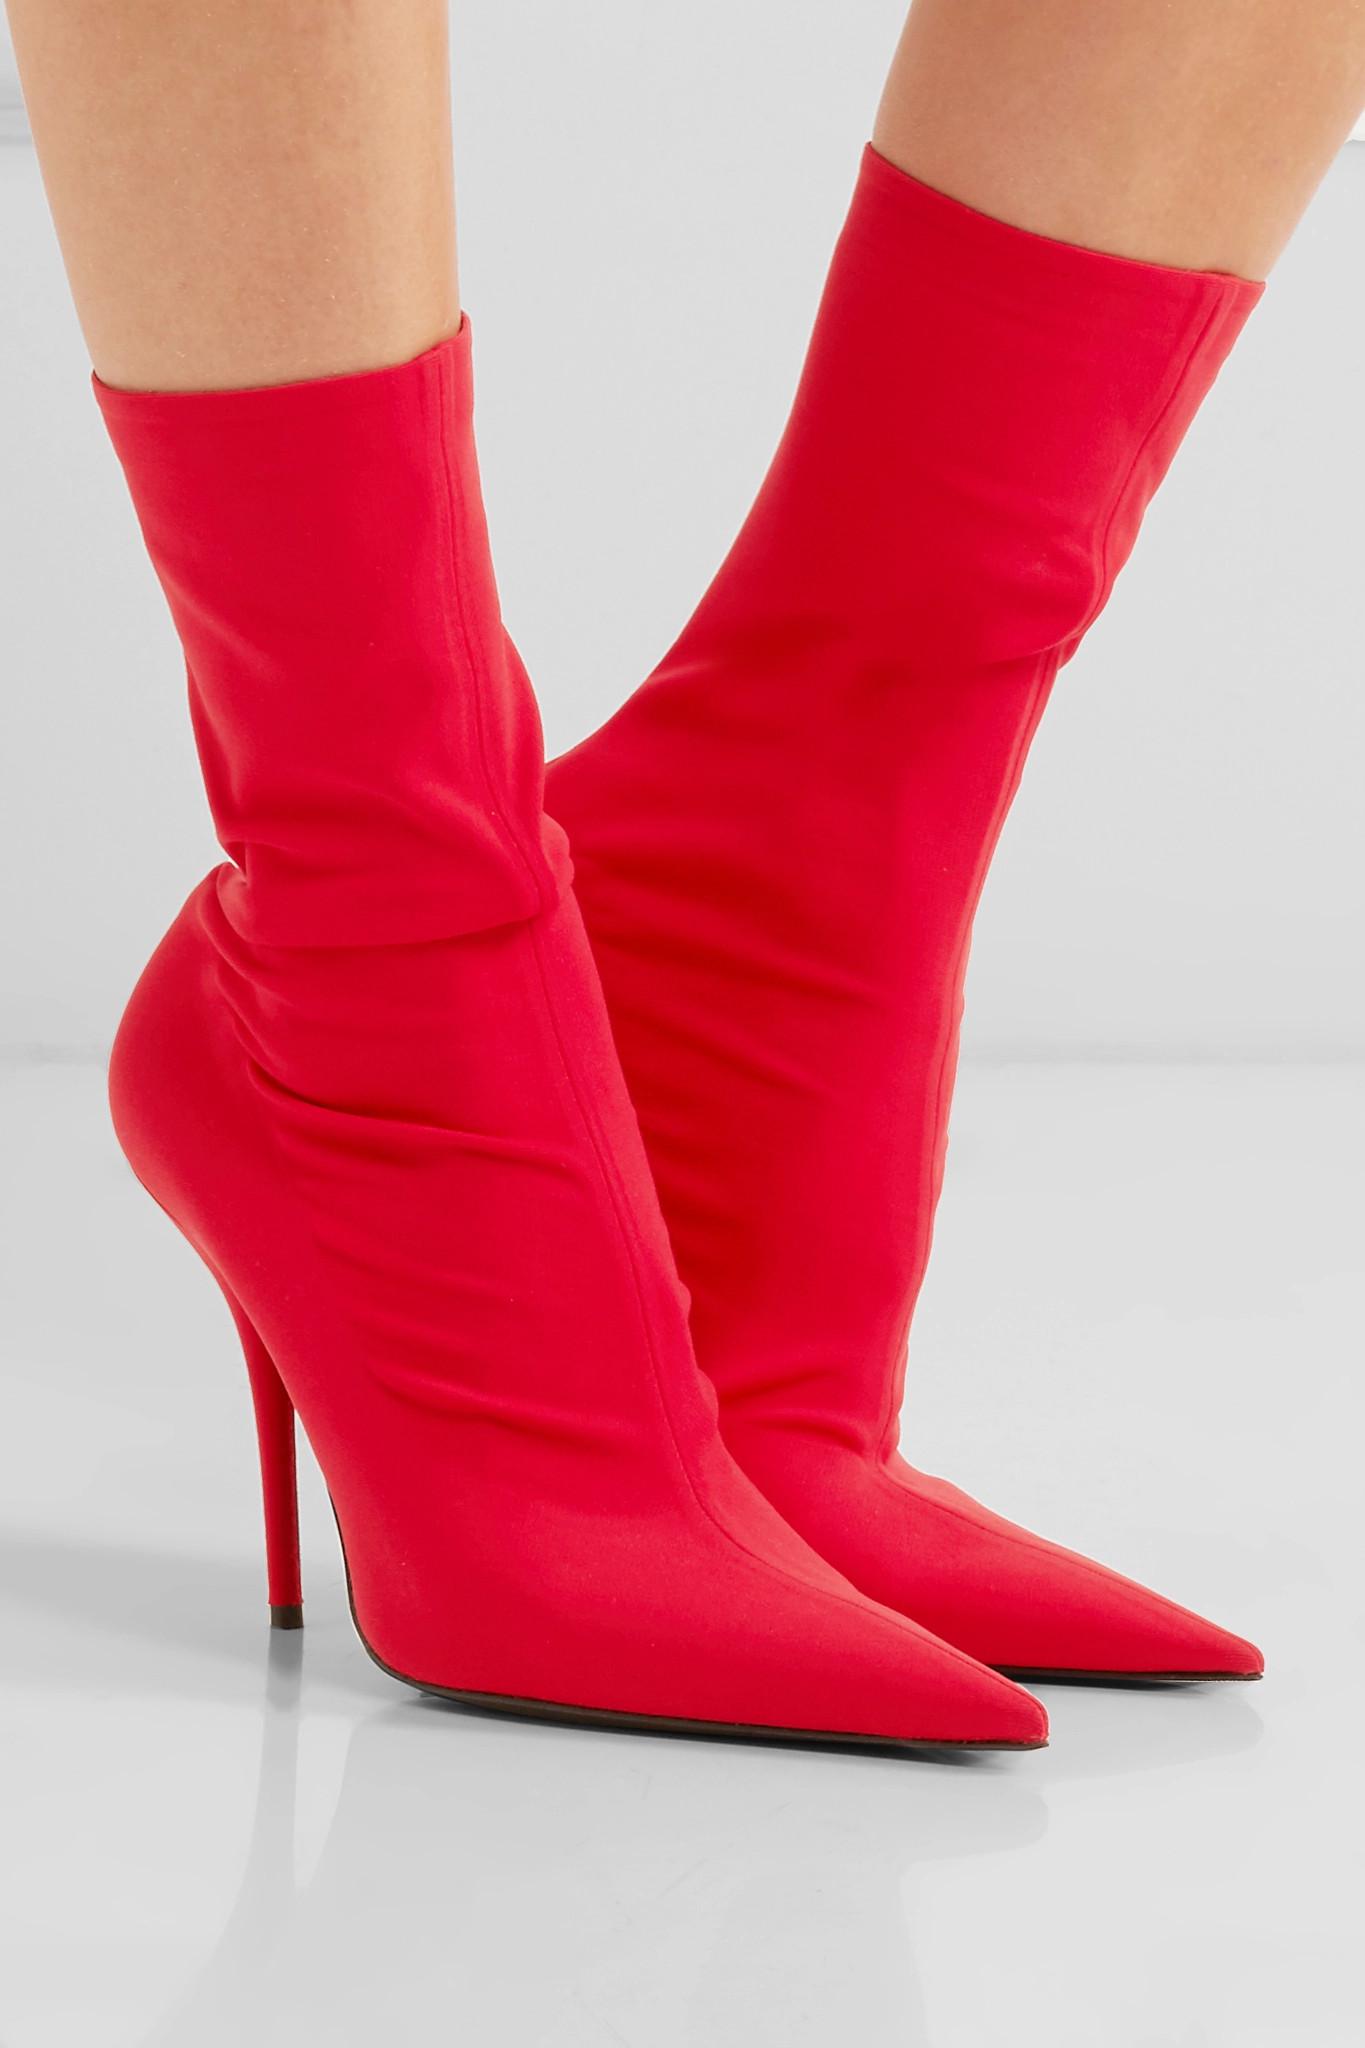 Balenciaga Stretch-jersey Ankle Boots in Red - Lyst